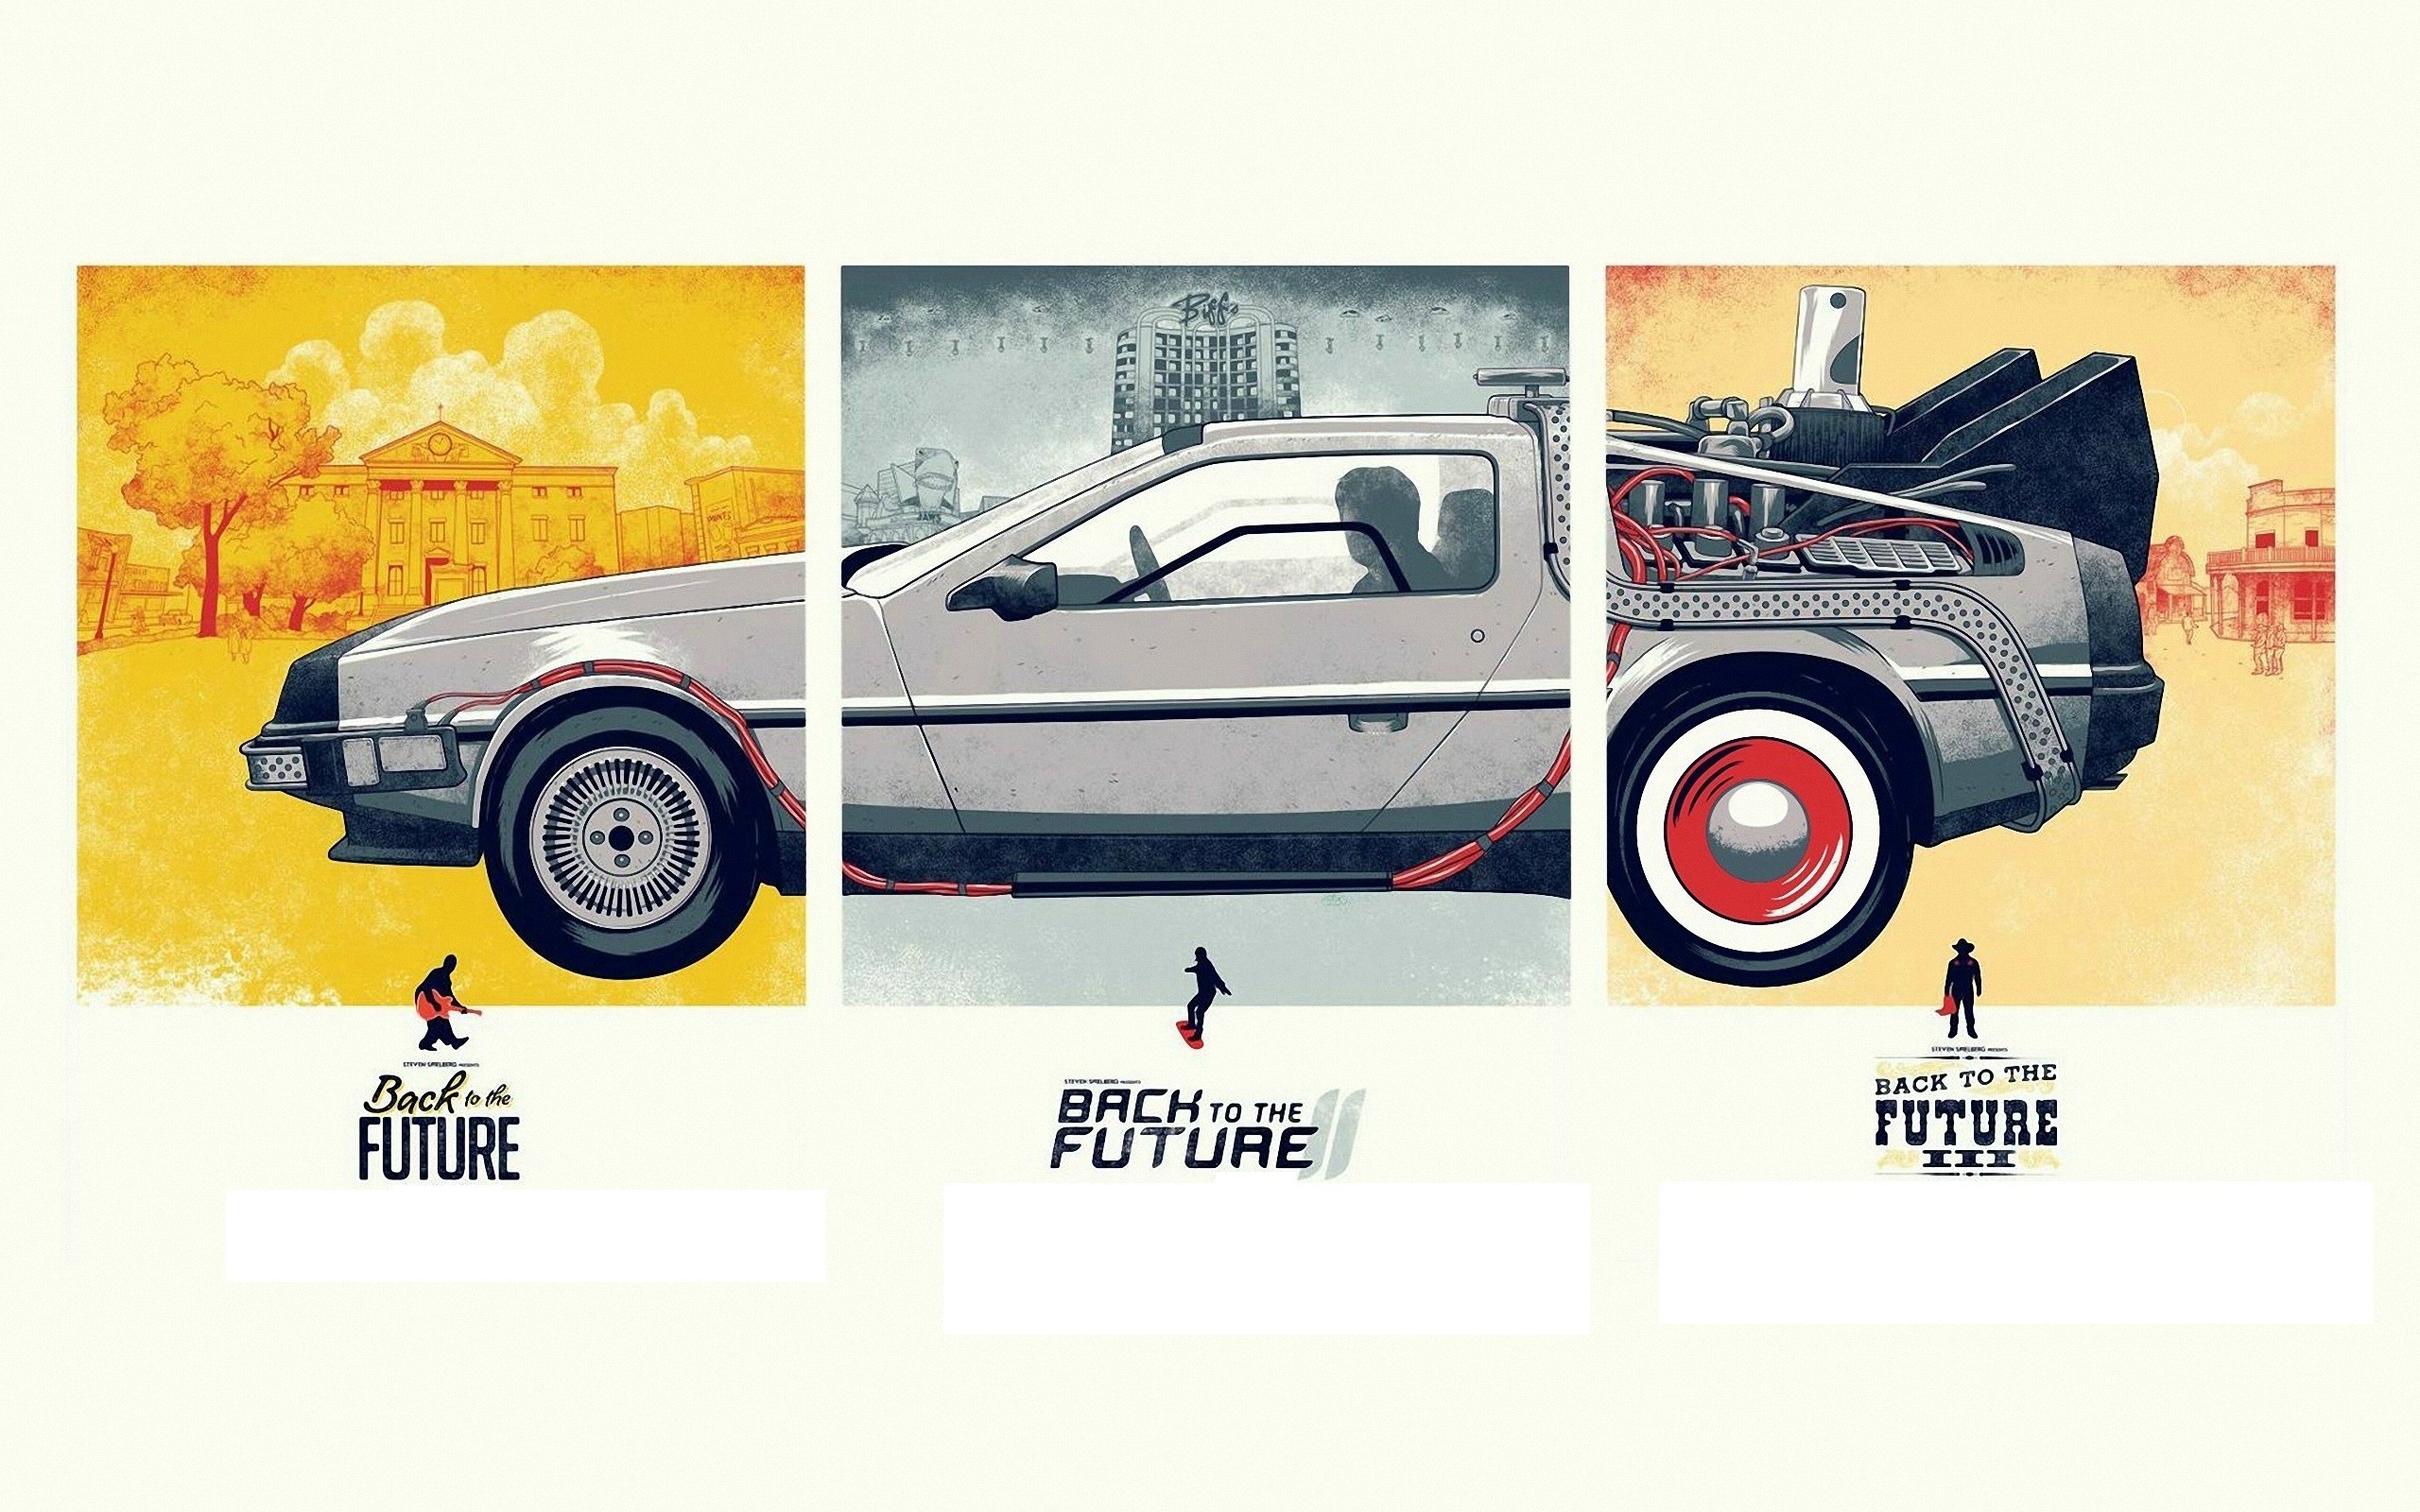 2560x1600 ... to the Future posters HD Wallpaper 